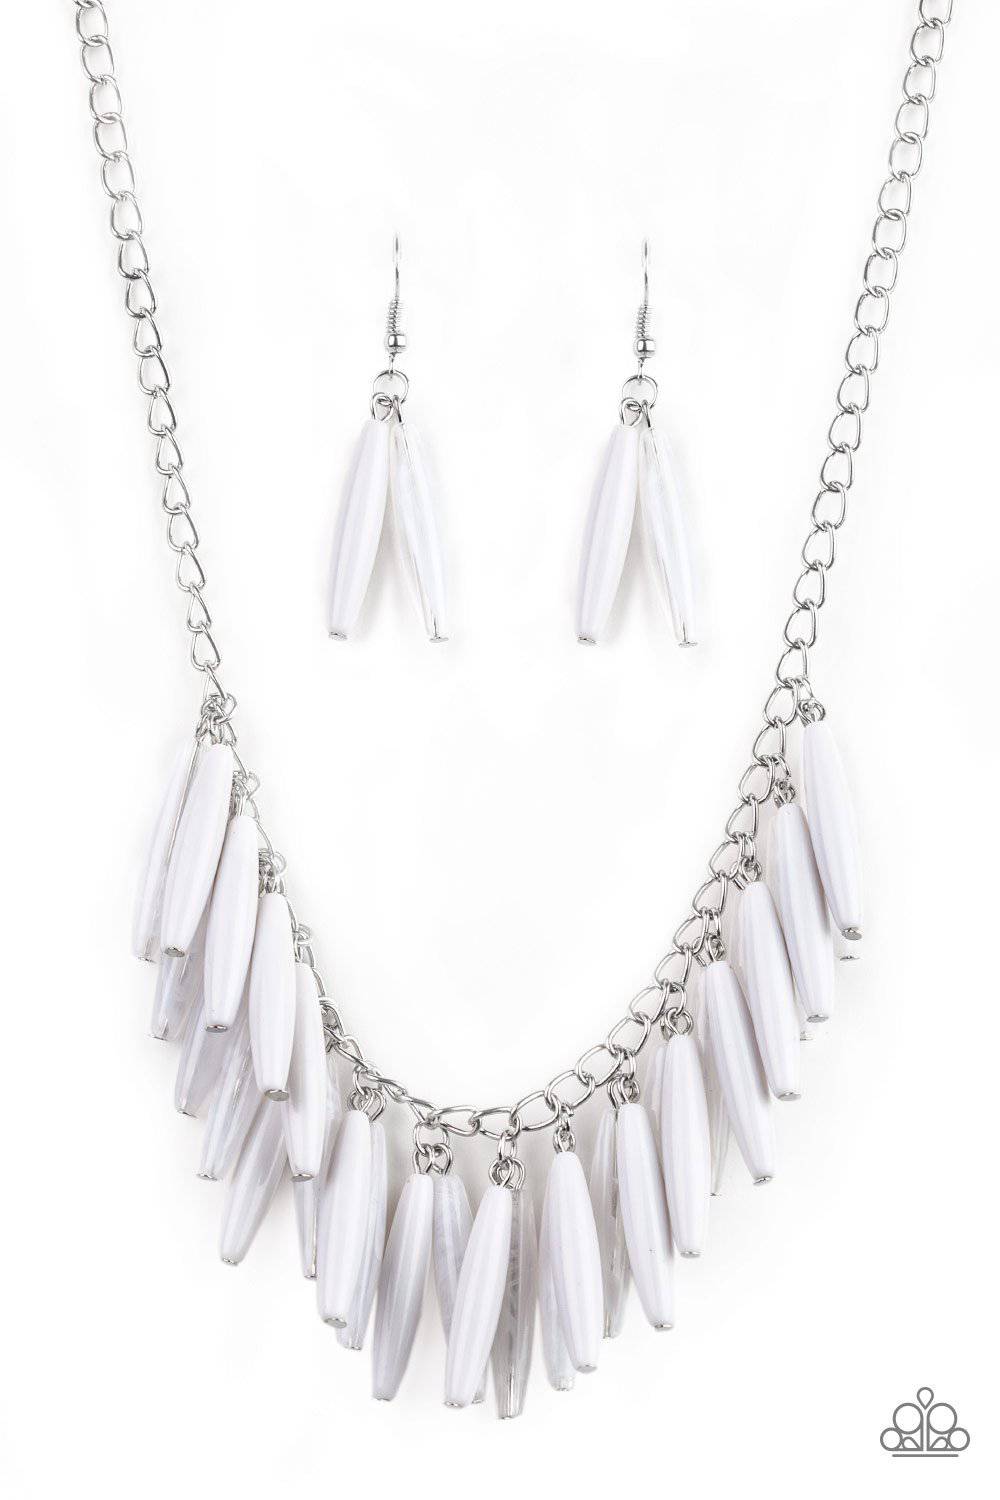 Full of Flavor - White Fringe Bead Necklace - Paparazzi Accessories - GlaMarous Titi Jewels